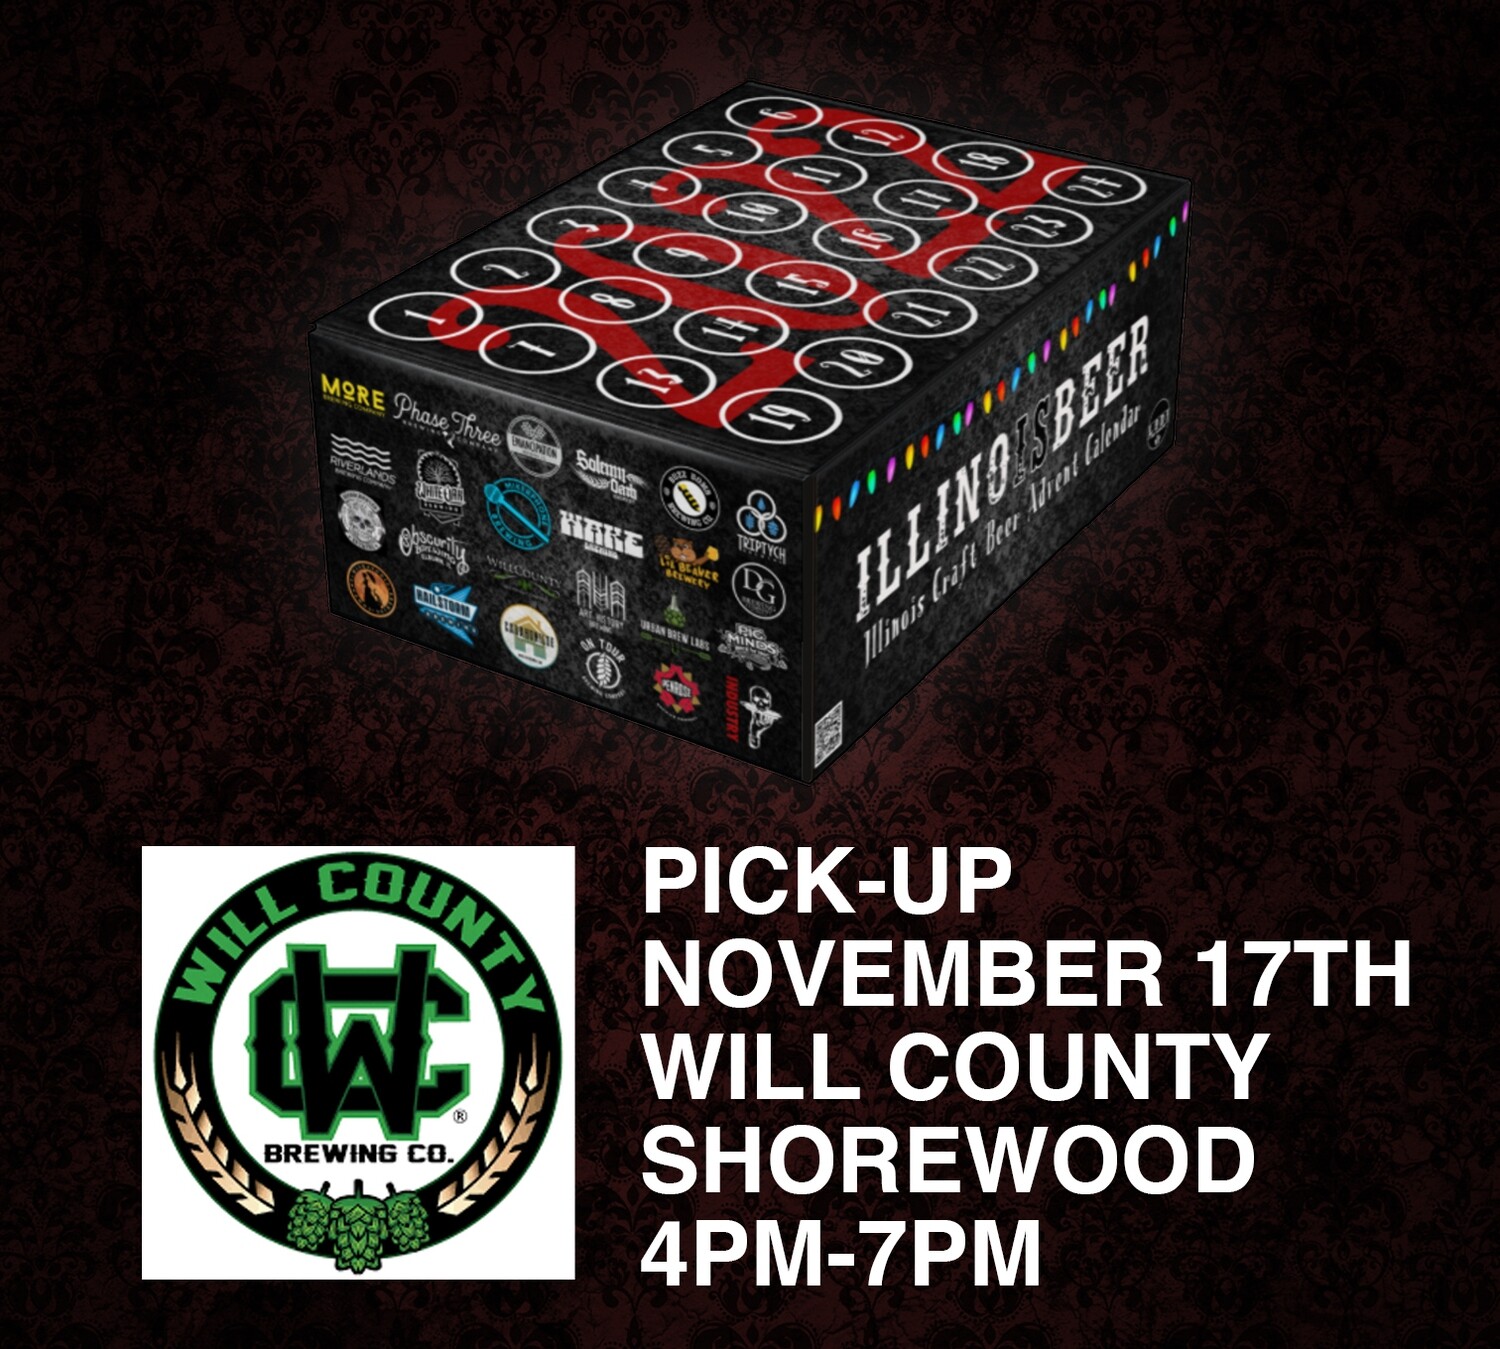 Pick Up 11/17 Shorewood IL (Will County) - 4PM to 7PM ILLINOISBEER Craft Beer Advent Calendar